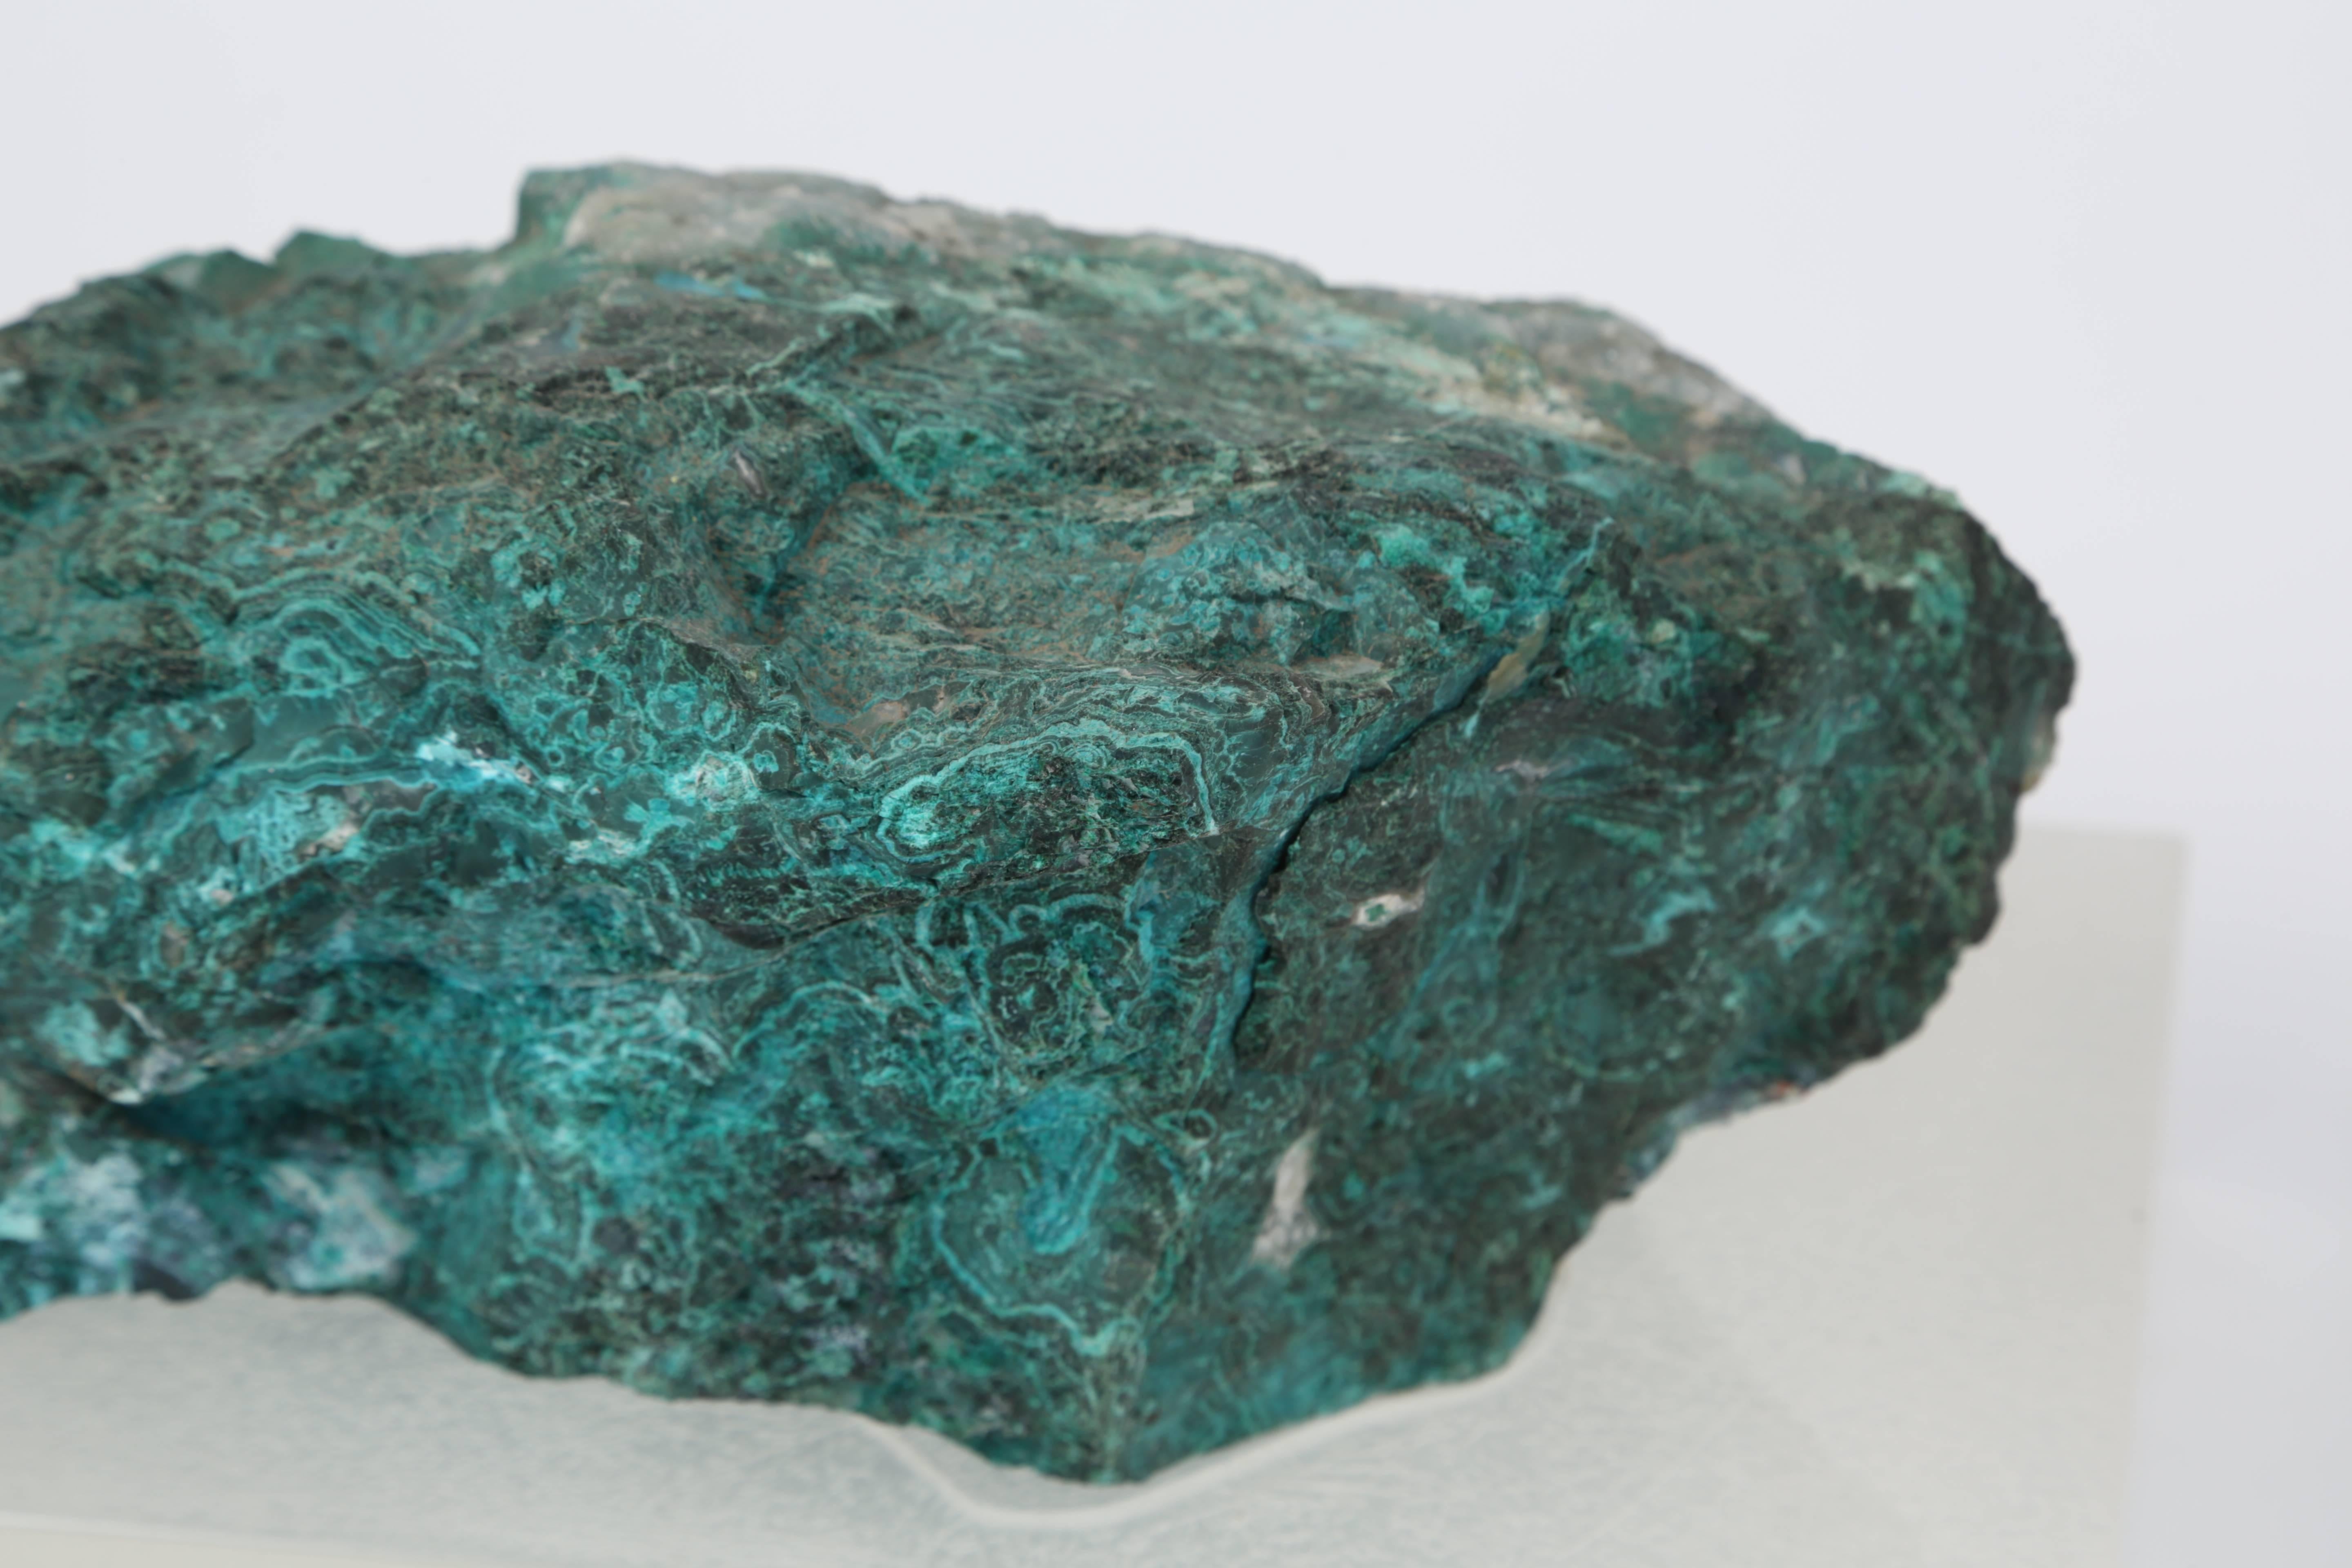 Carved Large Malachite Specimen on Lucite Plinth from the Brody House